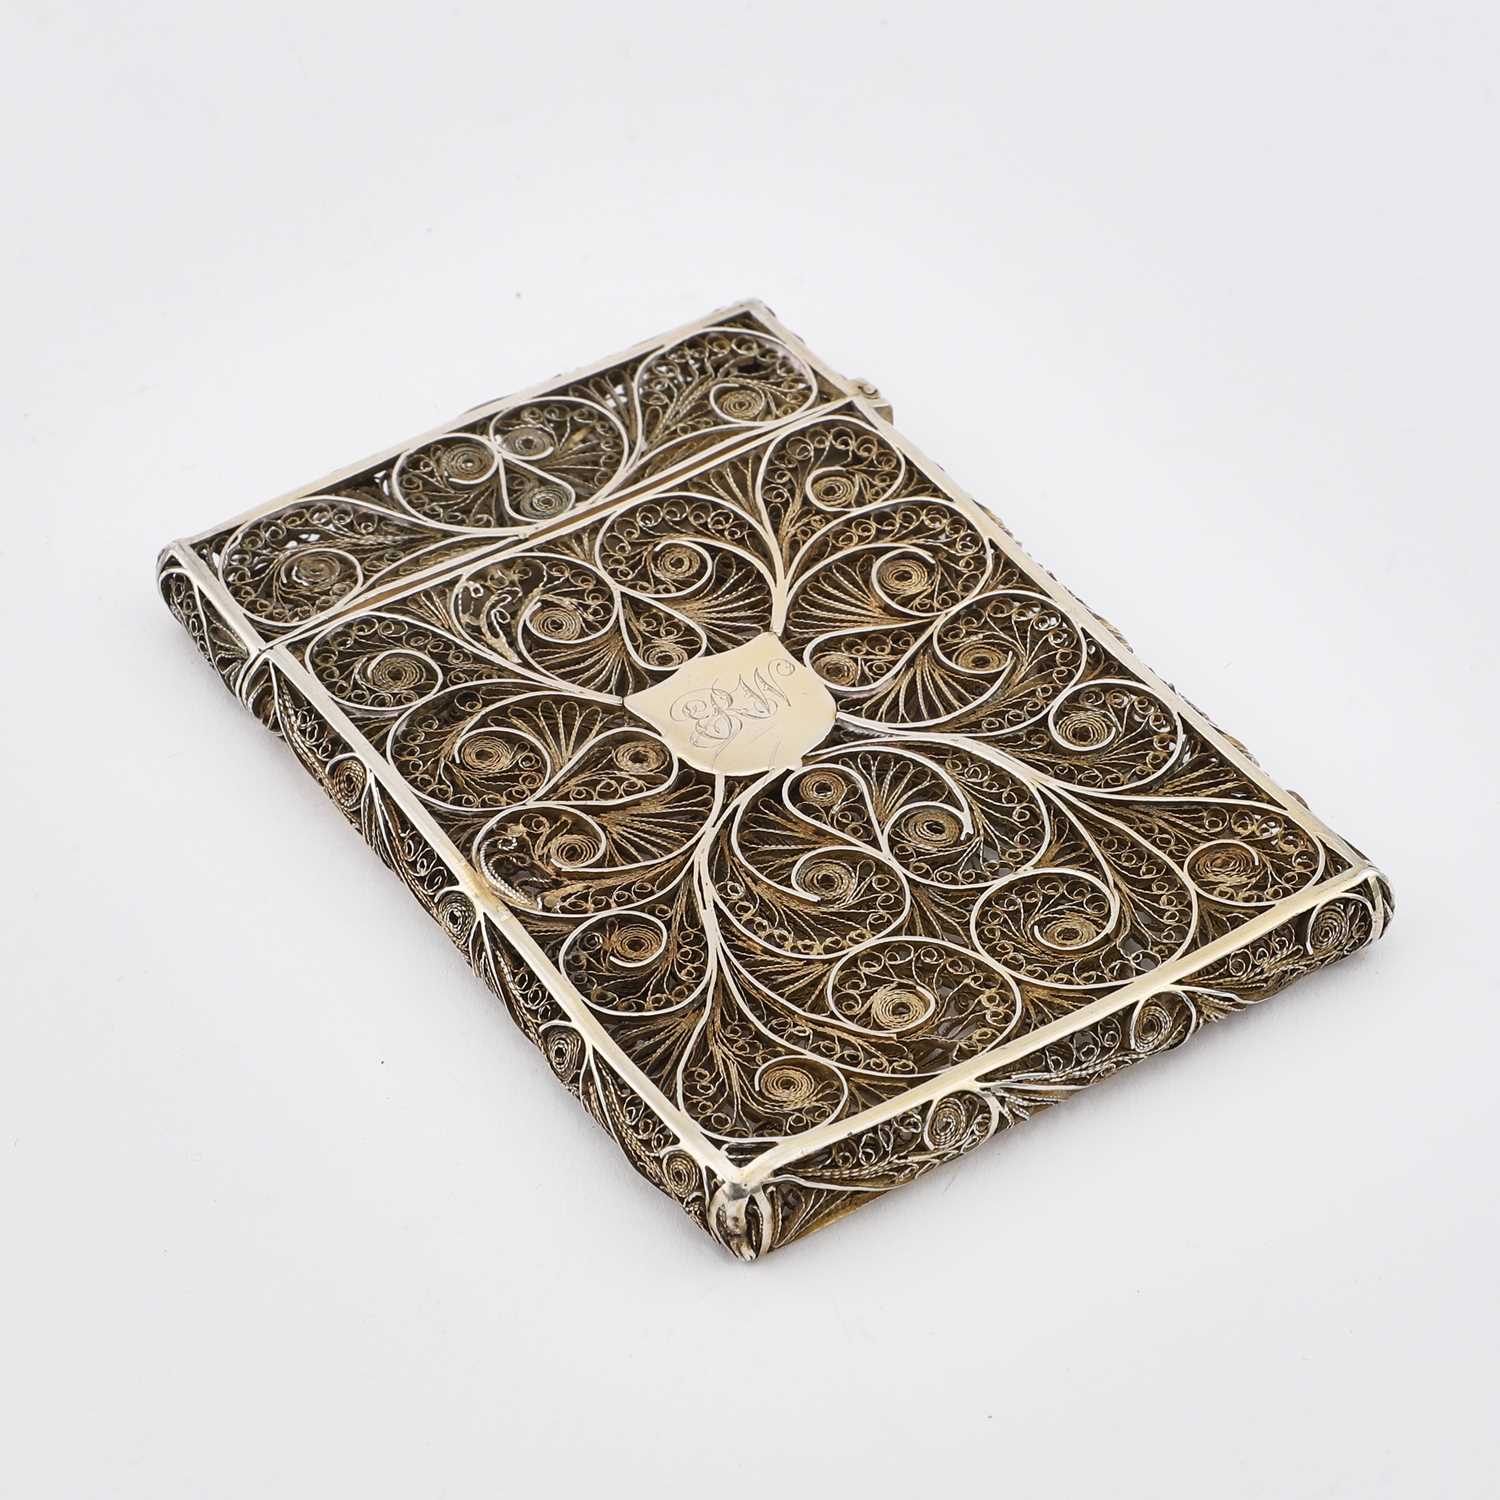 AN EARLY 19TH CENTURY SILVER-GILT FILIGREE CARD CASE - Image 2 of 2